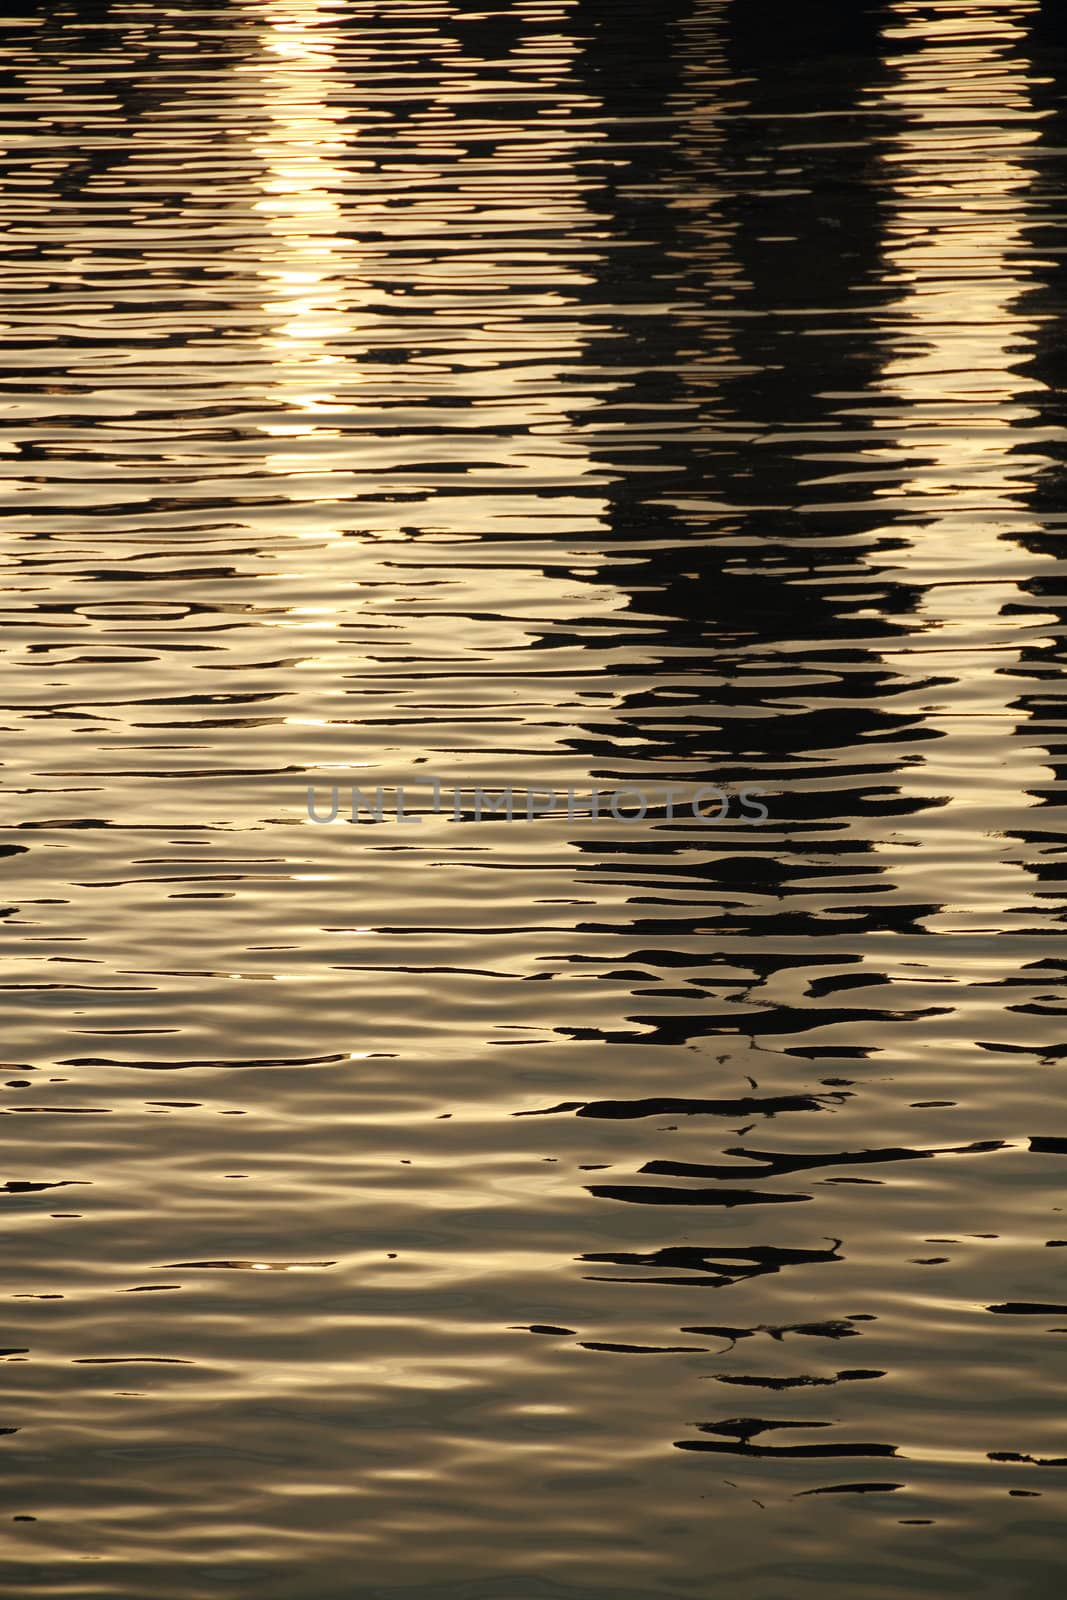 Ripples of water reflecting warm tomes of an evening.